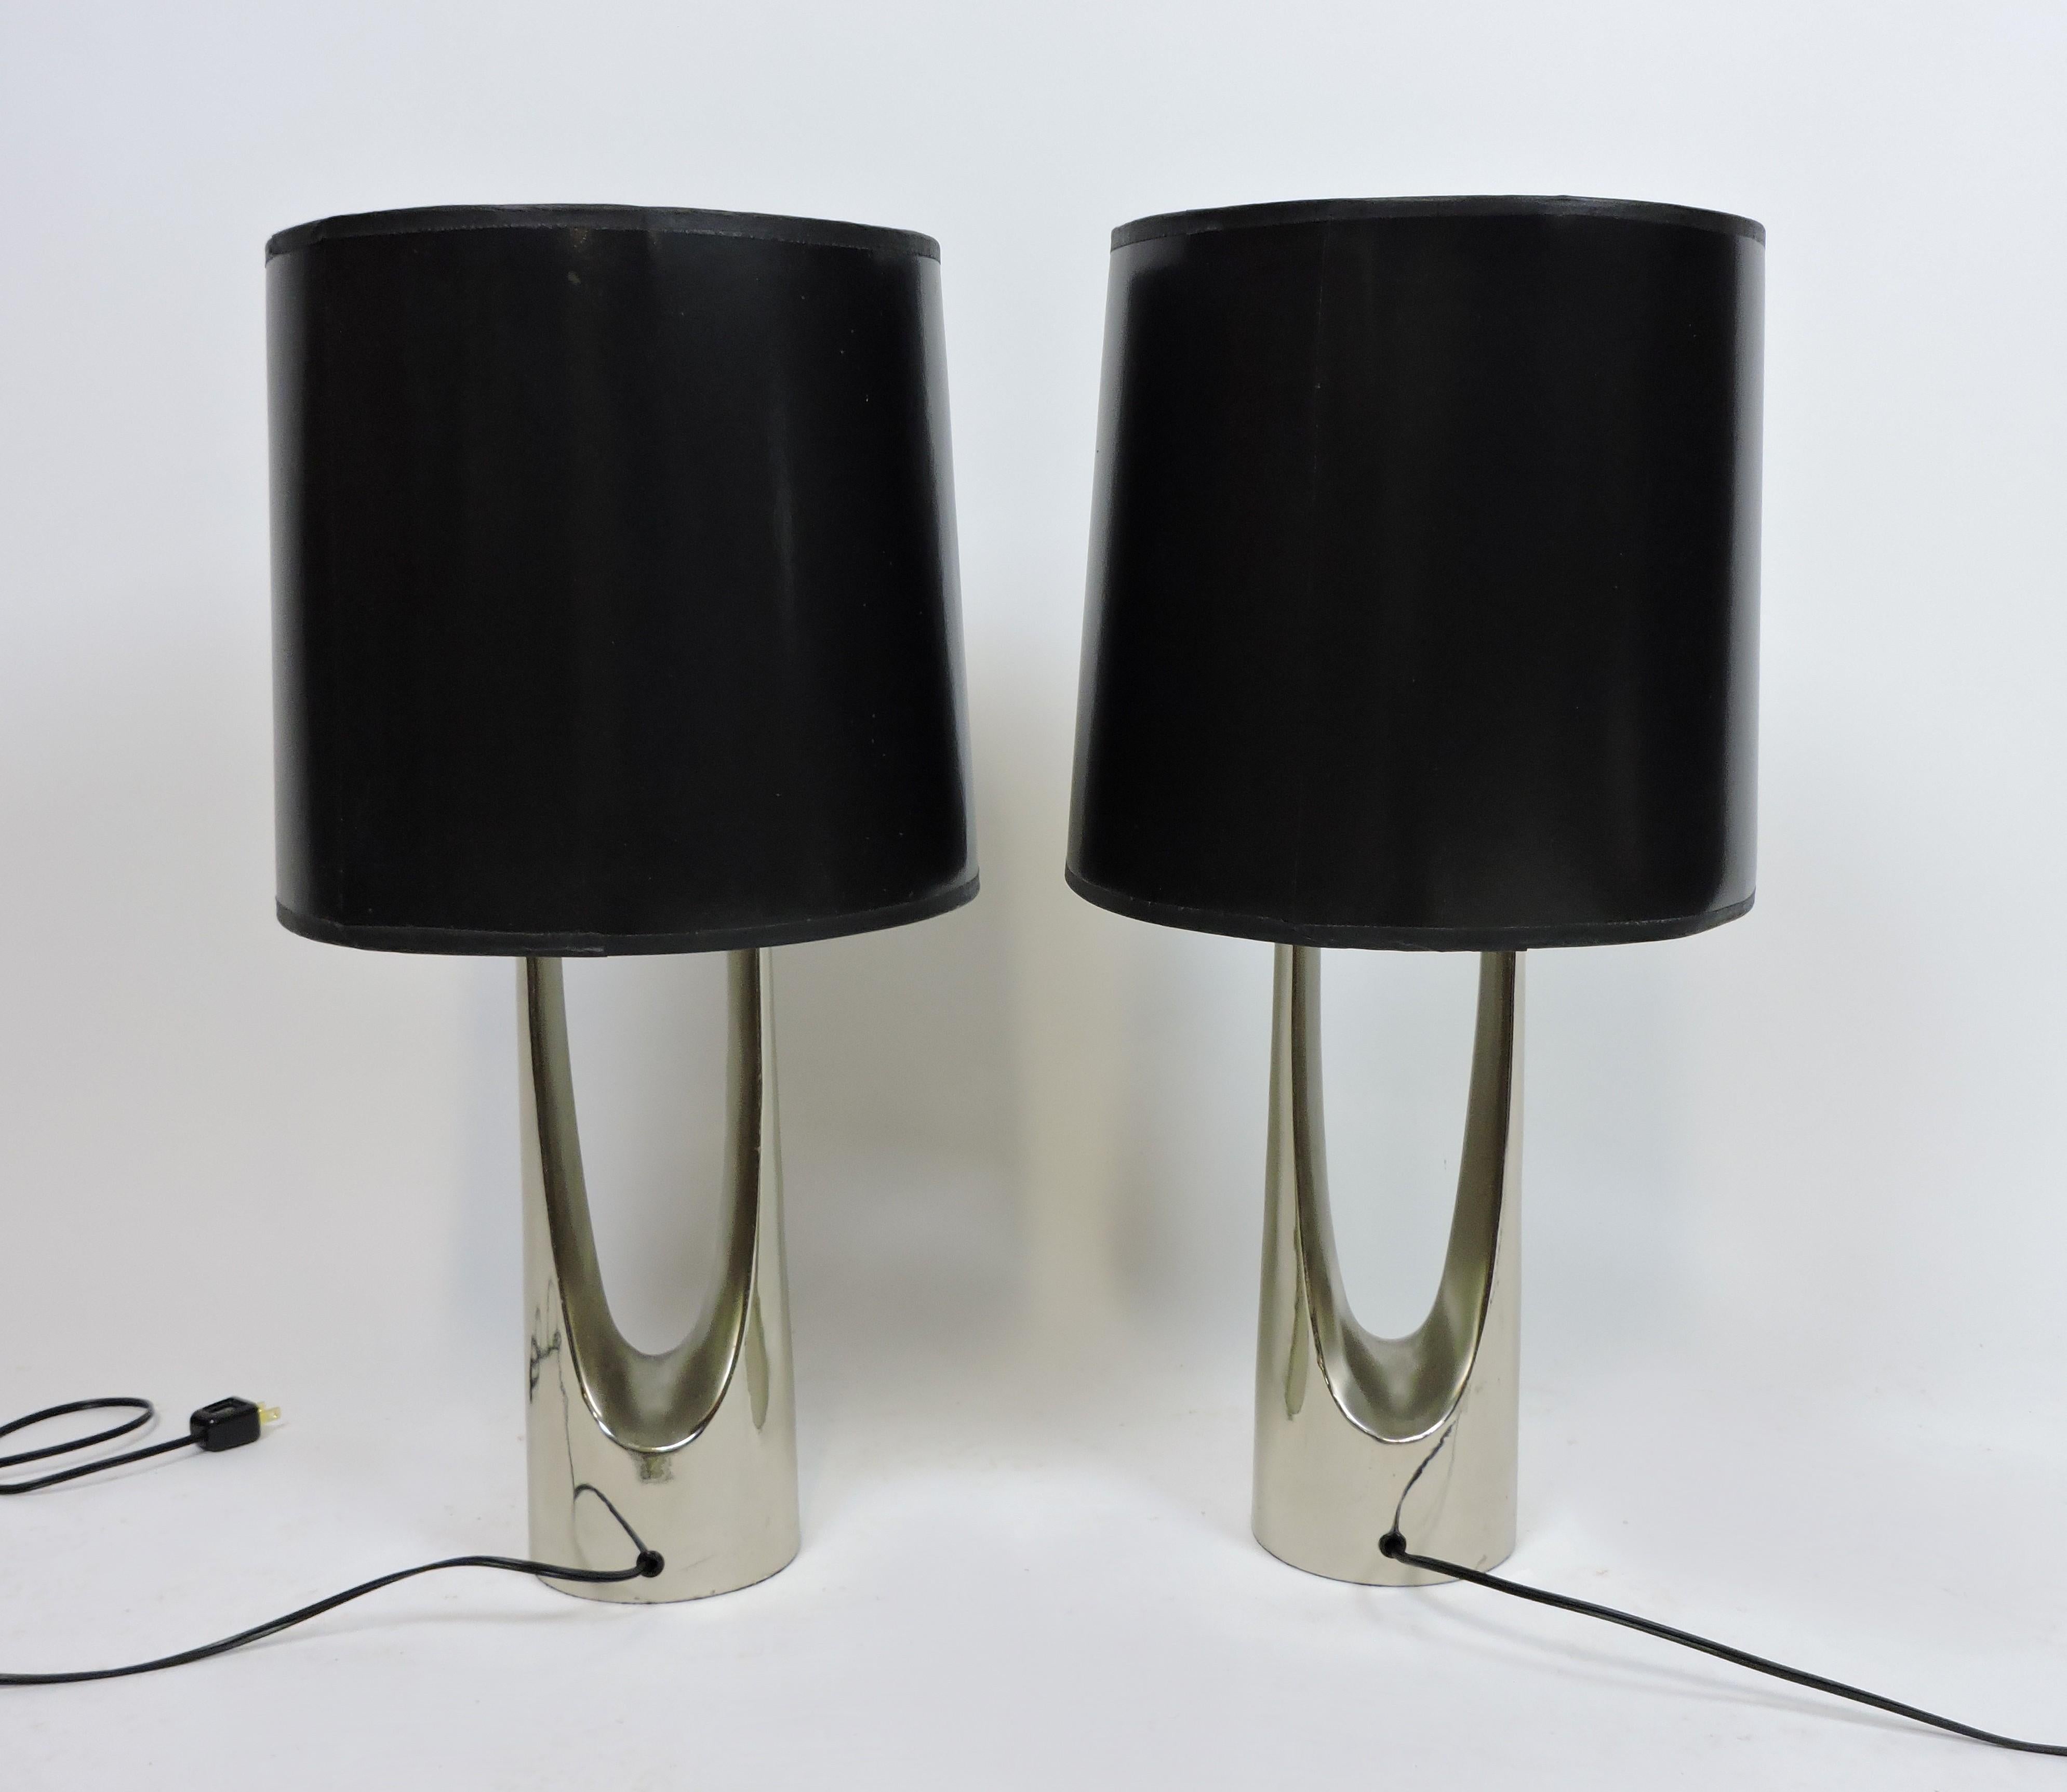 Striking pair of table lamps made by high quality lighting manufacturer, Laurel Lamp Company of Newark, NJ. These heavy and well-made lamps have chrome enamel finished metal bases in a wishbone shape and the original shades and finials. They have